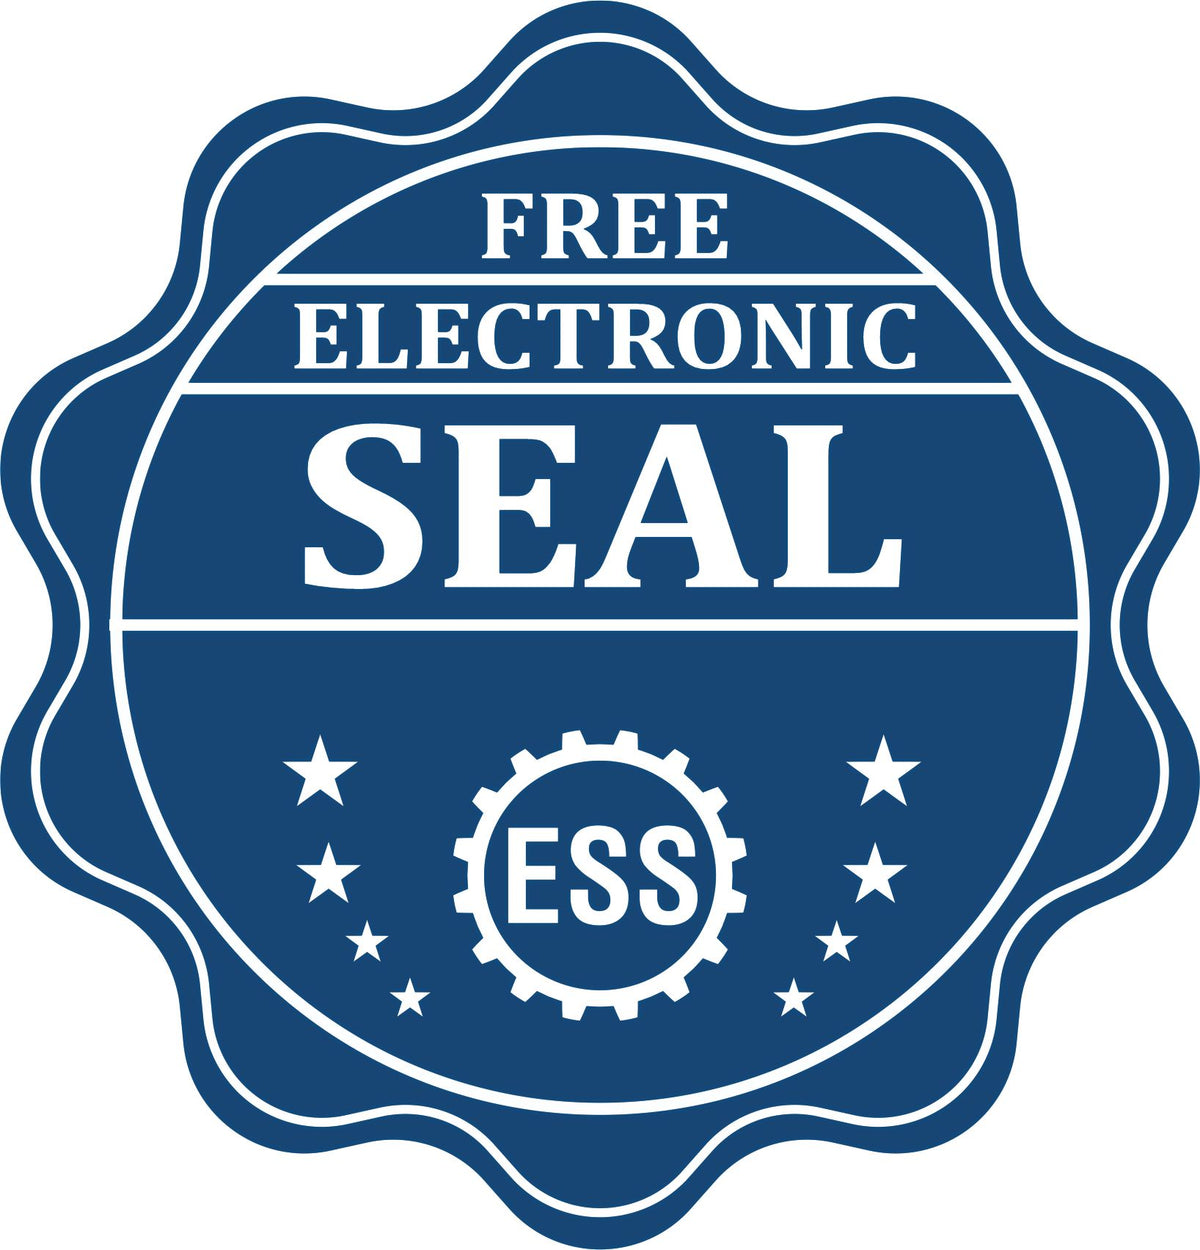 A badge showing a free electronic seal for the Gift Connecticut Engineer Seal with stars and the ESS gear on the emblem.